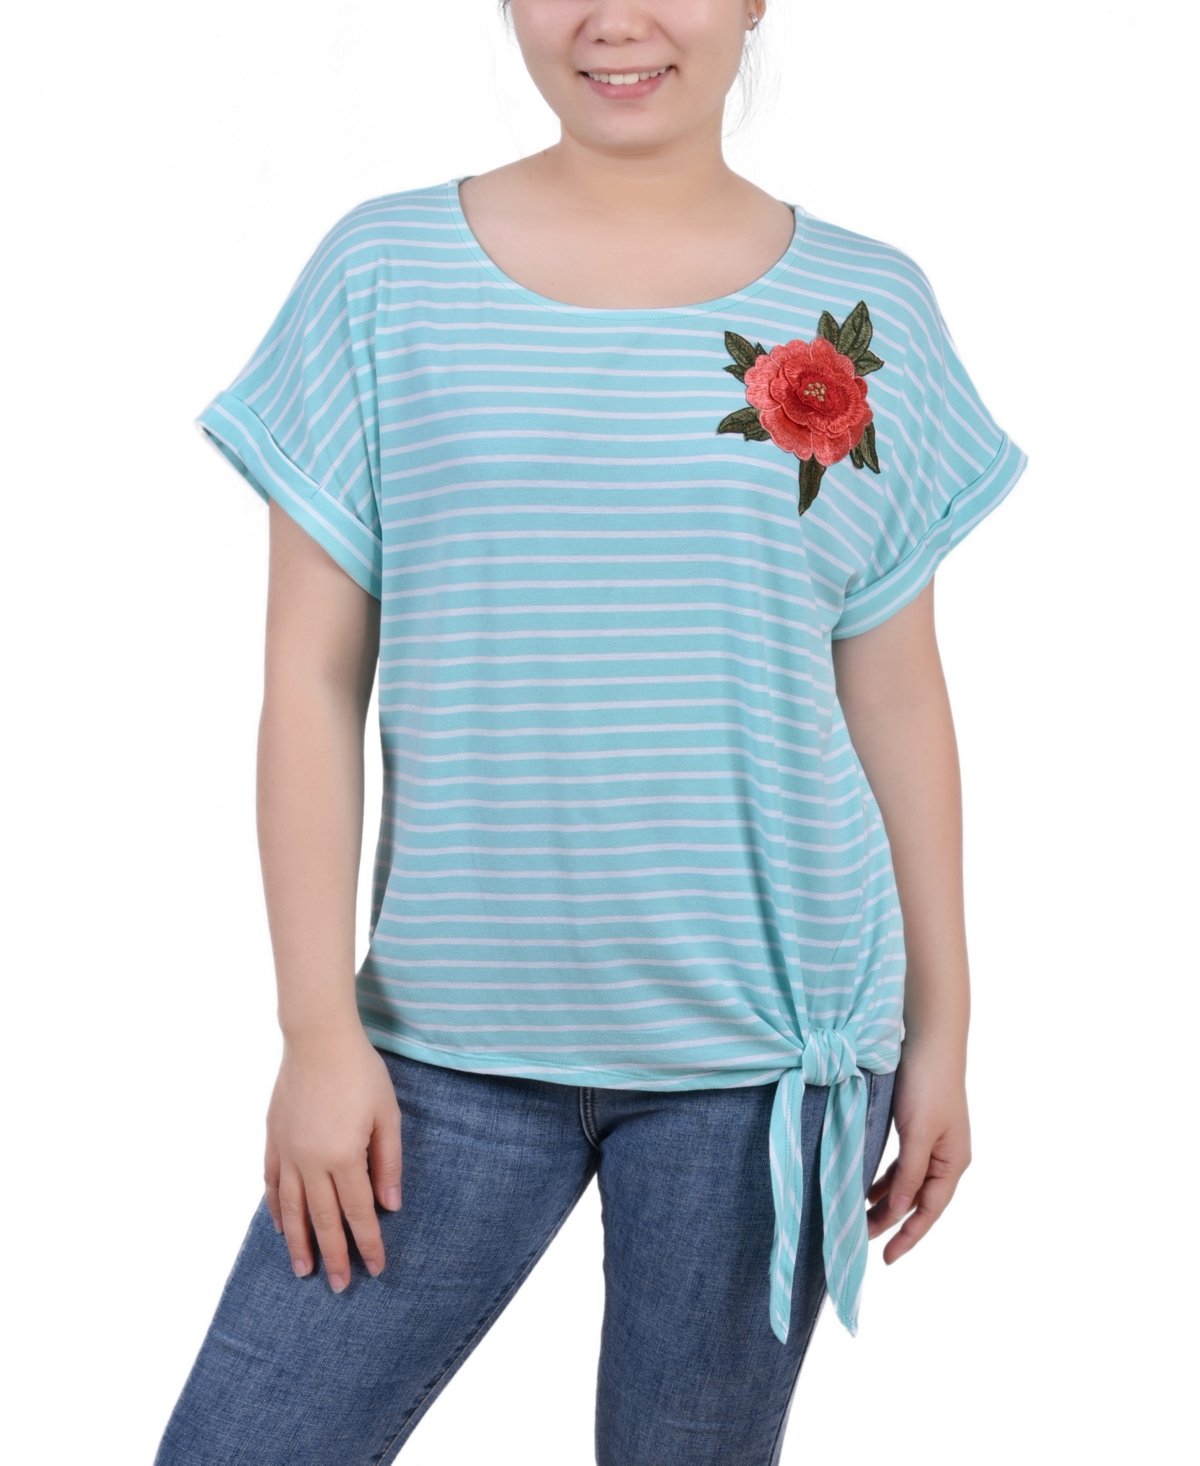 Women's Short Sleeve Embroidered Tie Front Top - Oatmeal Blue Stripe